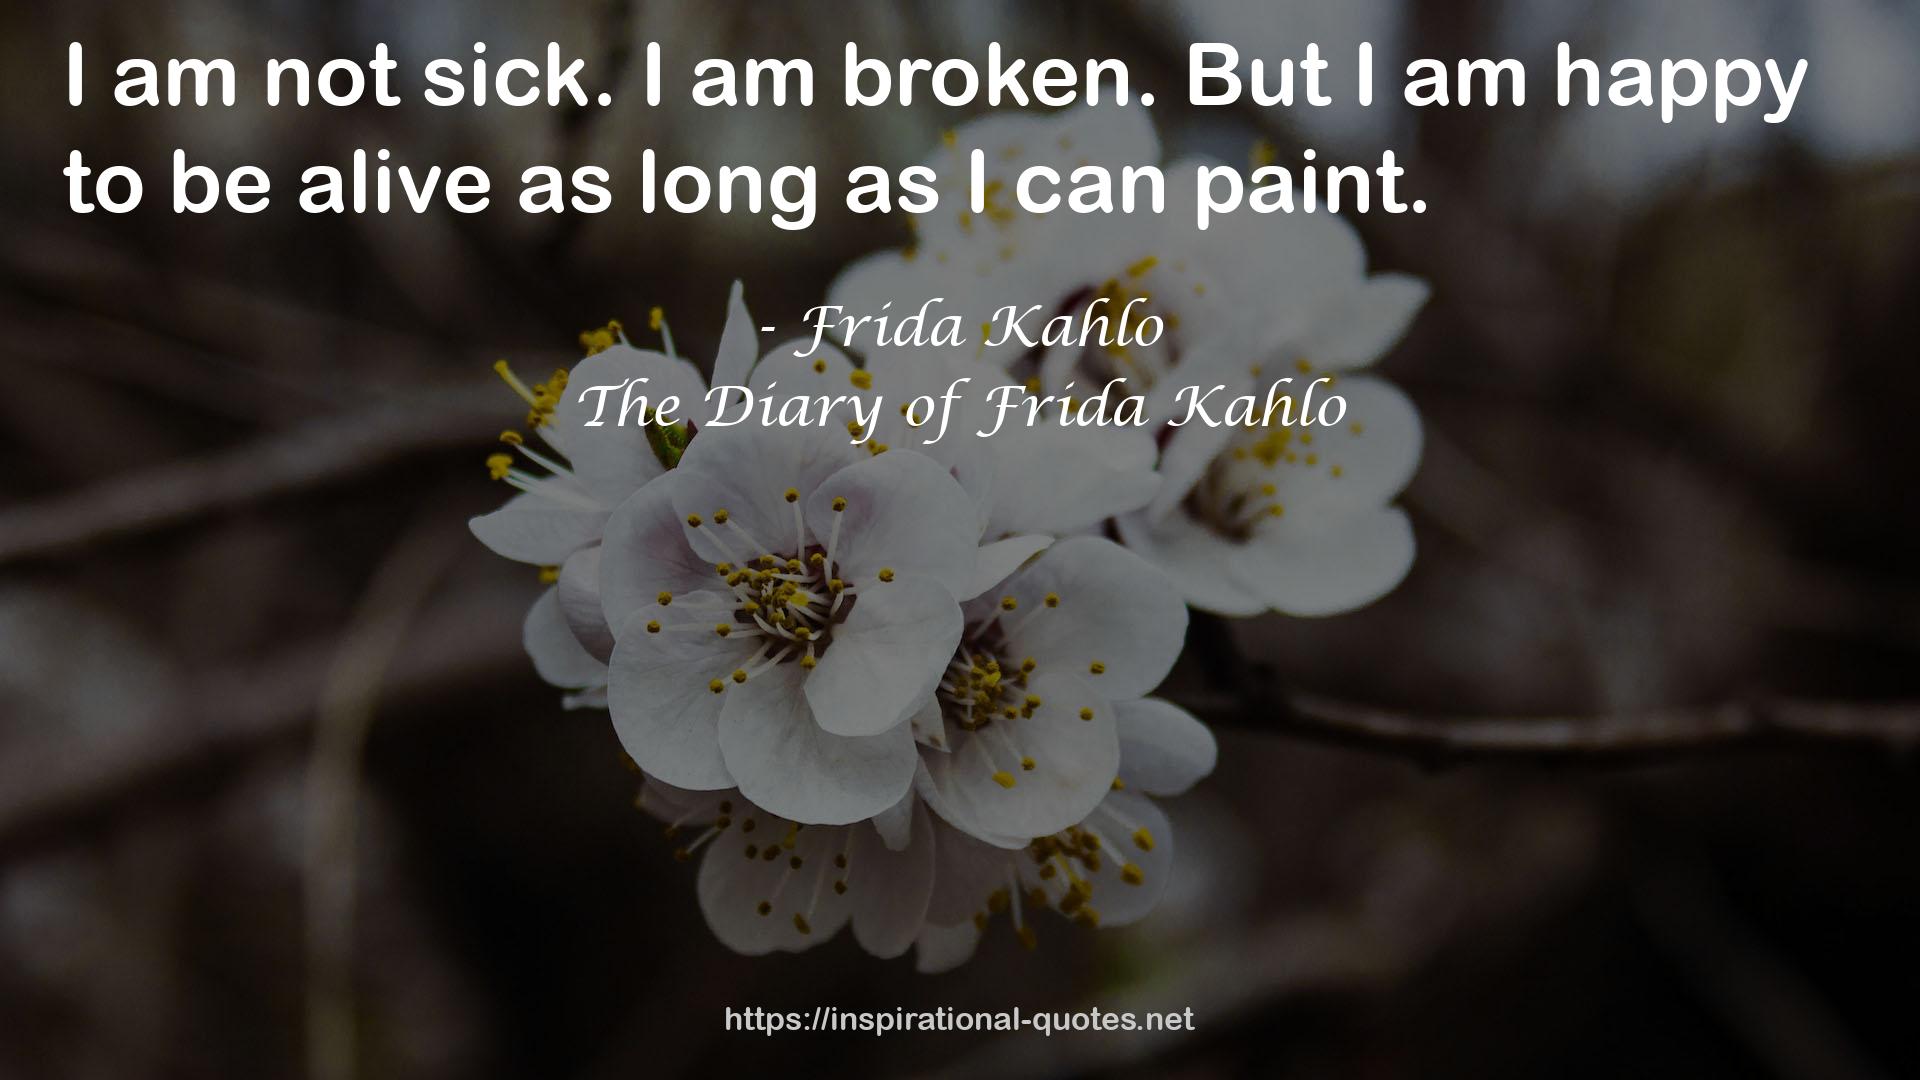 The Diary of Frida Kahlo QUOTES